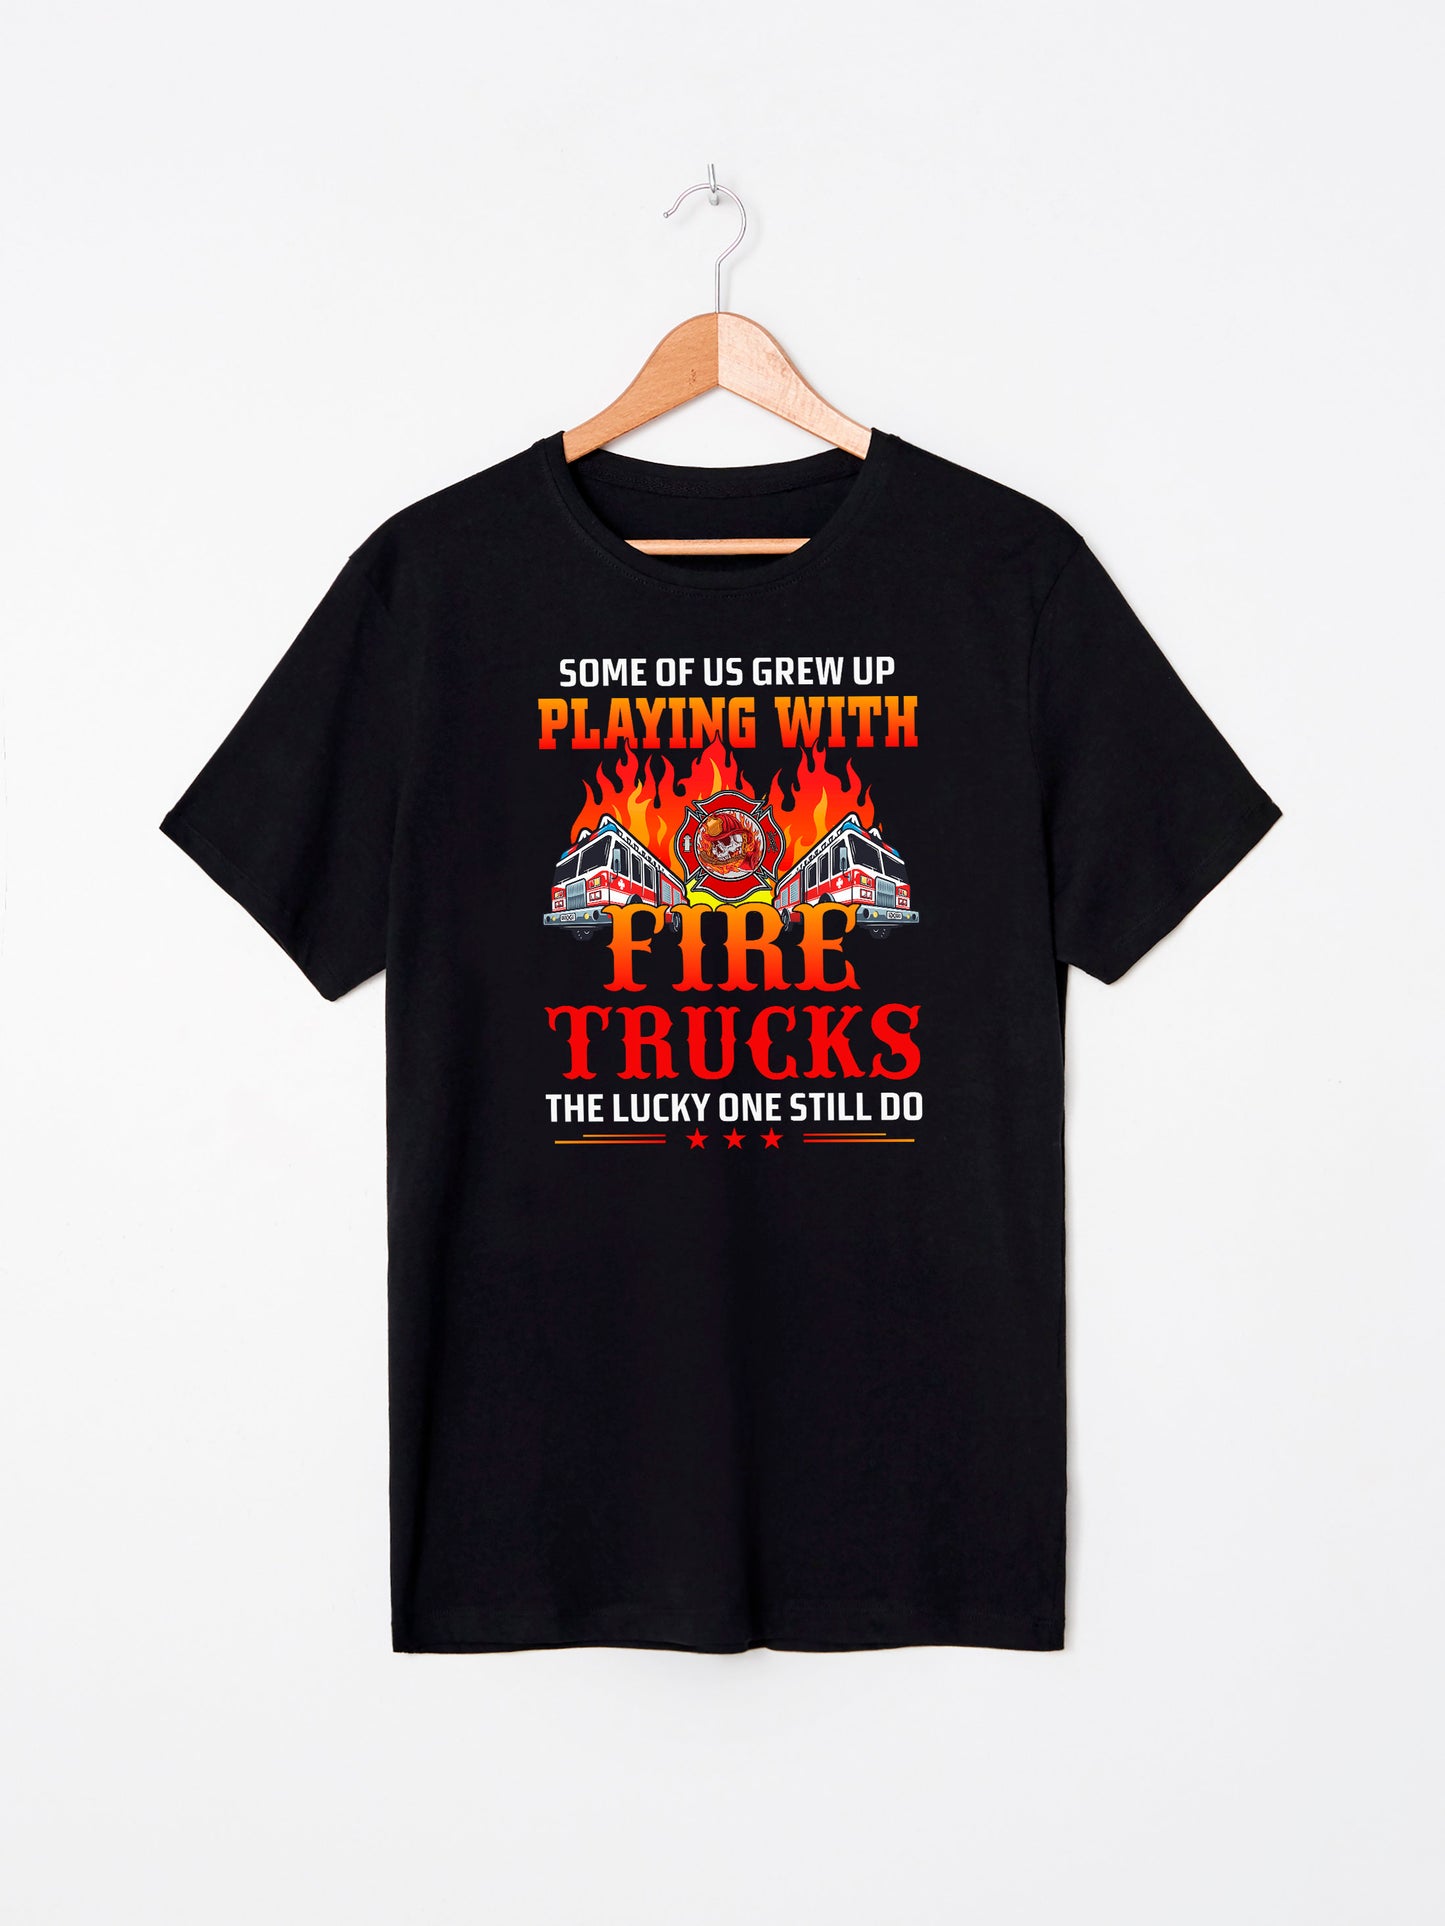 I Support First Responders T-Shirt Unisex sizes S-2XL